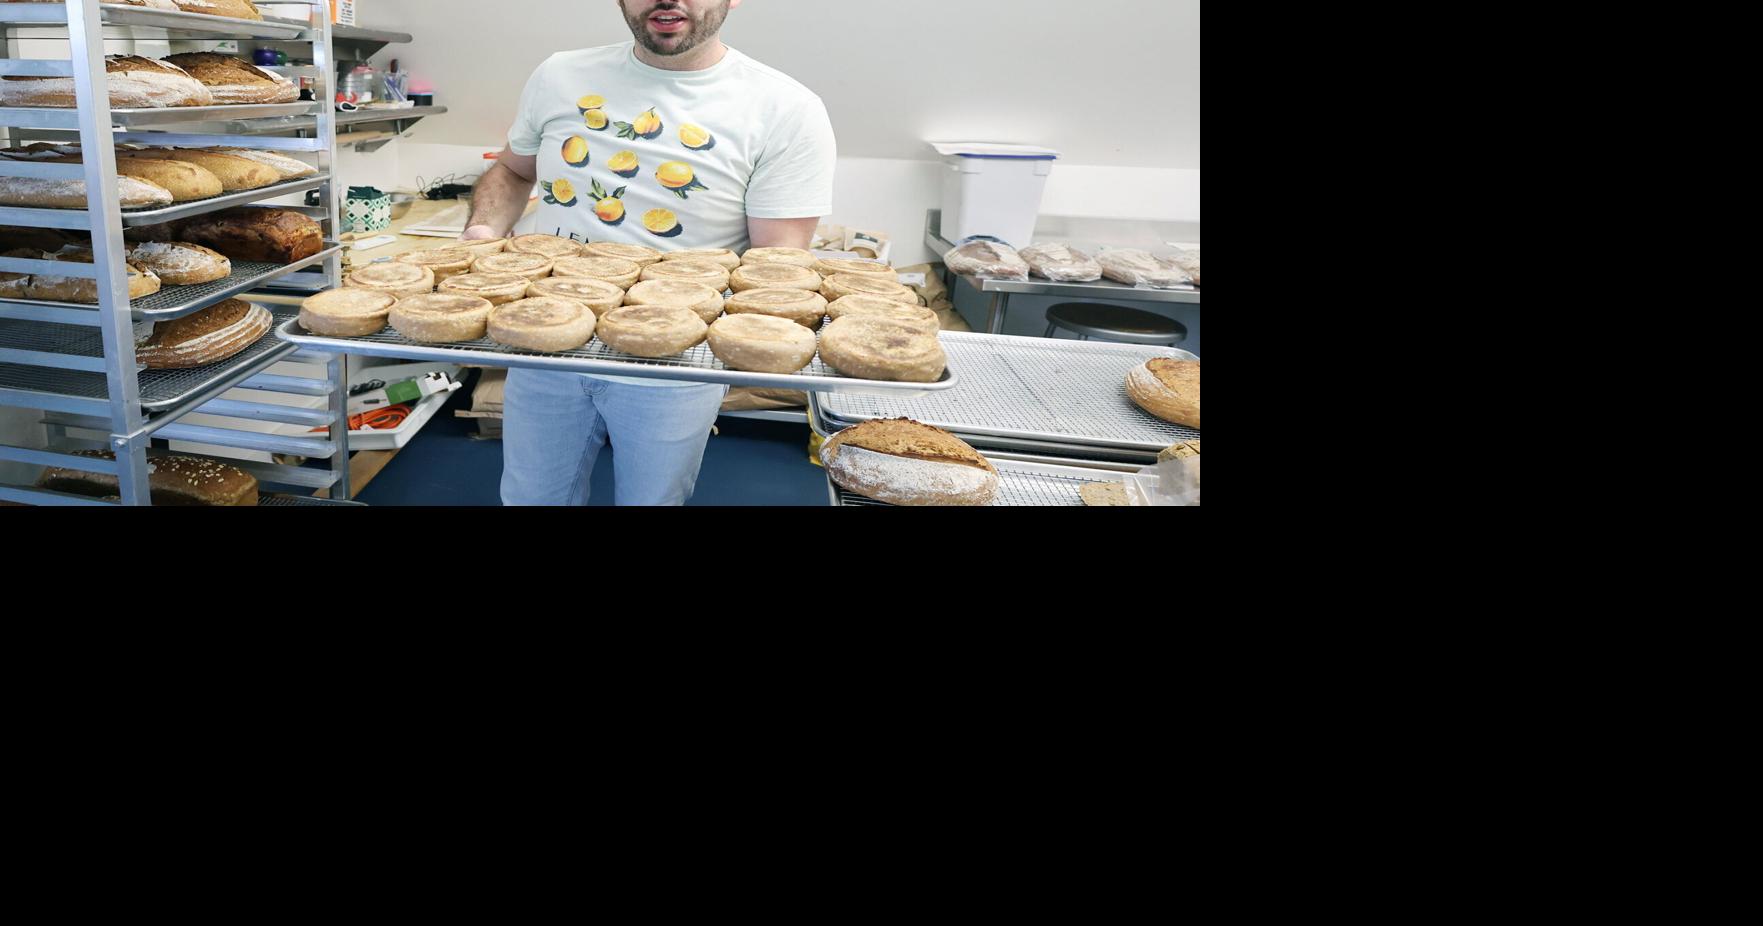 Jewish-influenced sourdough bread business booming in NEPA - Wilkes-Barre Citizens Voice